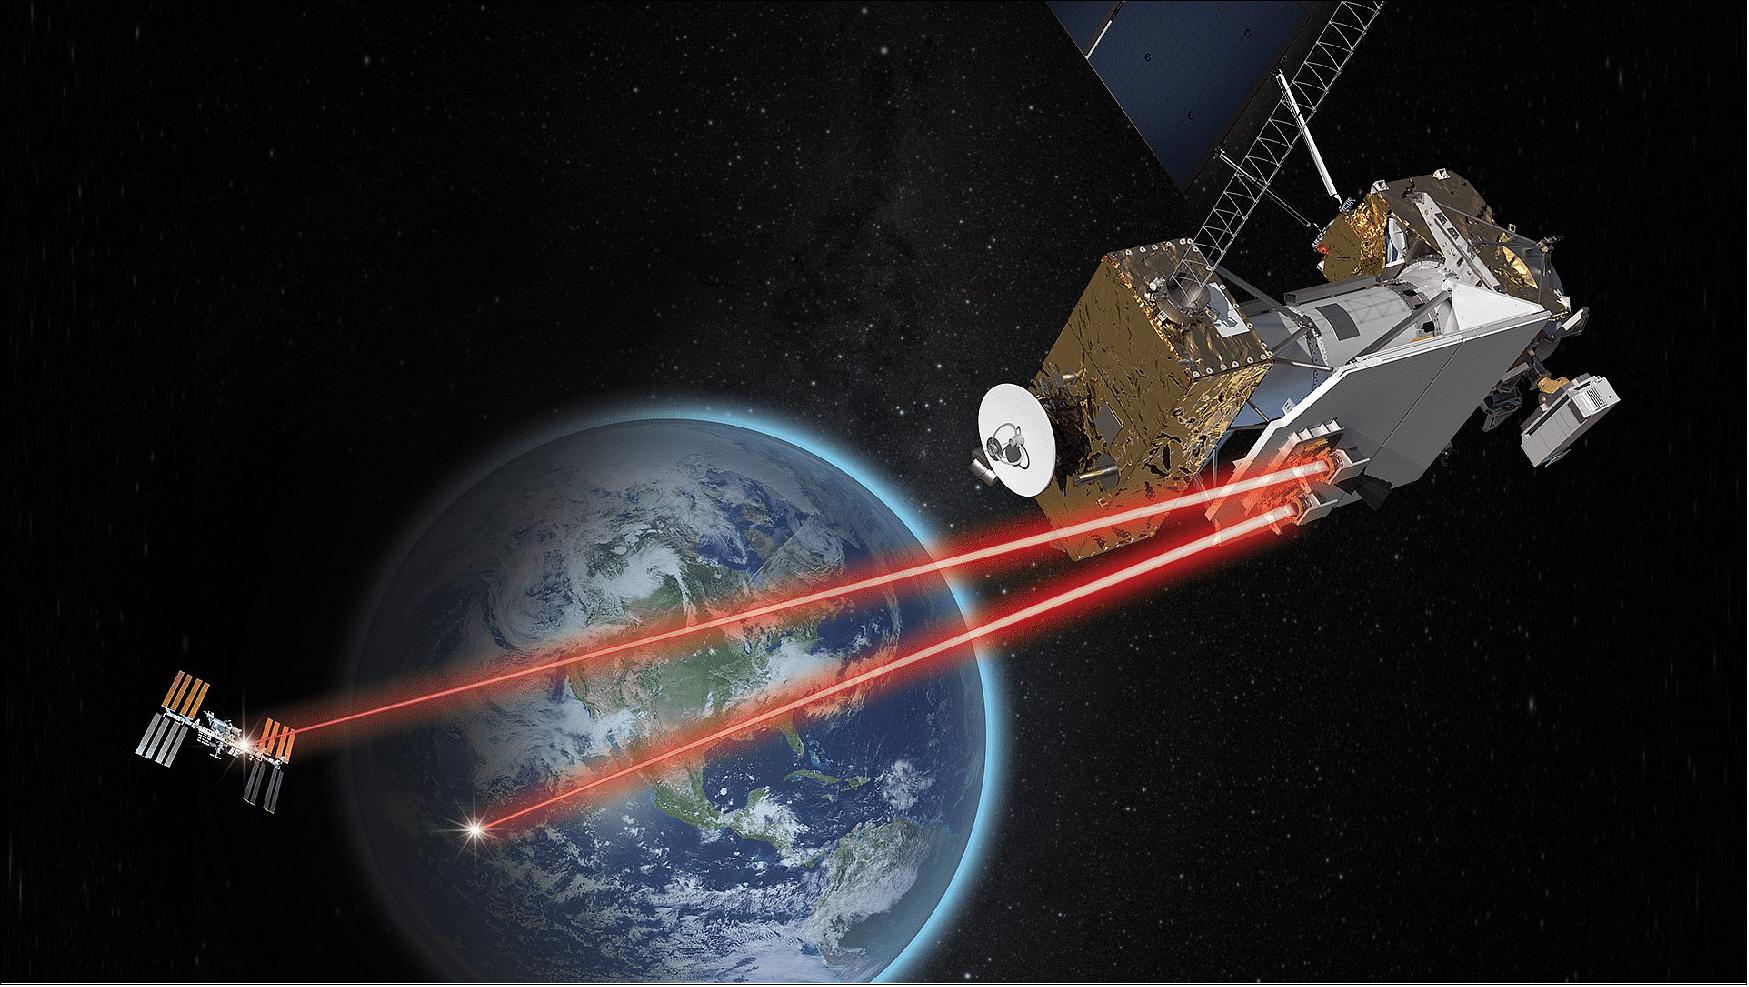 Figure 9: Illustration of NASA's LCRD payload on the STPSat-6 spacecraft communicating with the International Space Station over laser links (image credit: NASA's Goddard Space Flight Center)